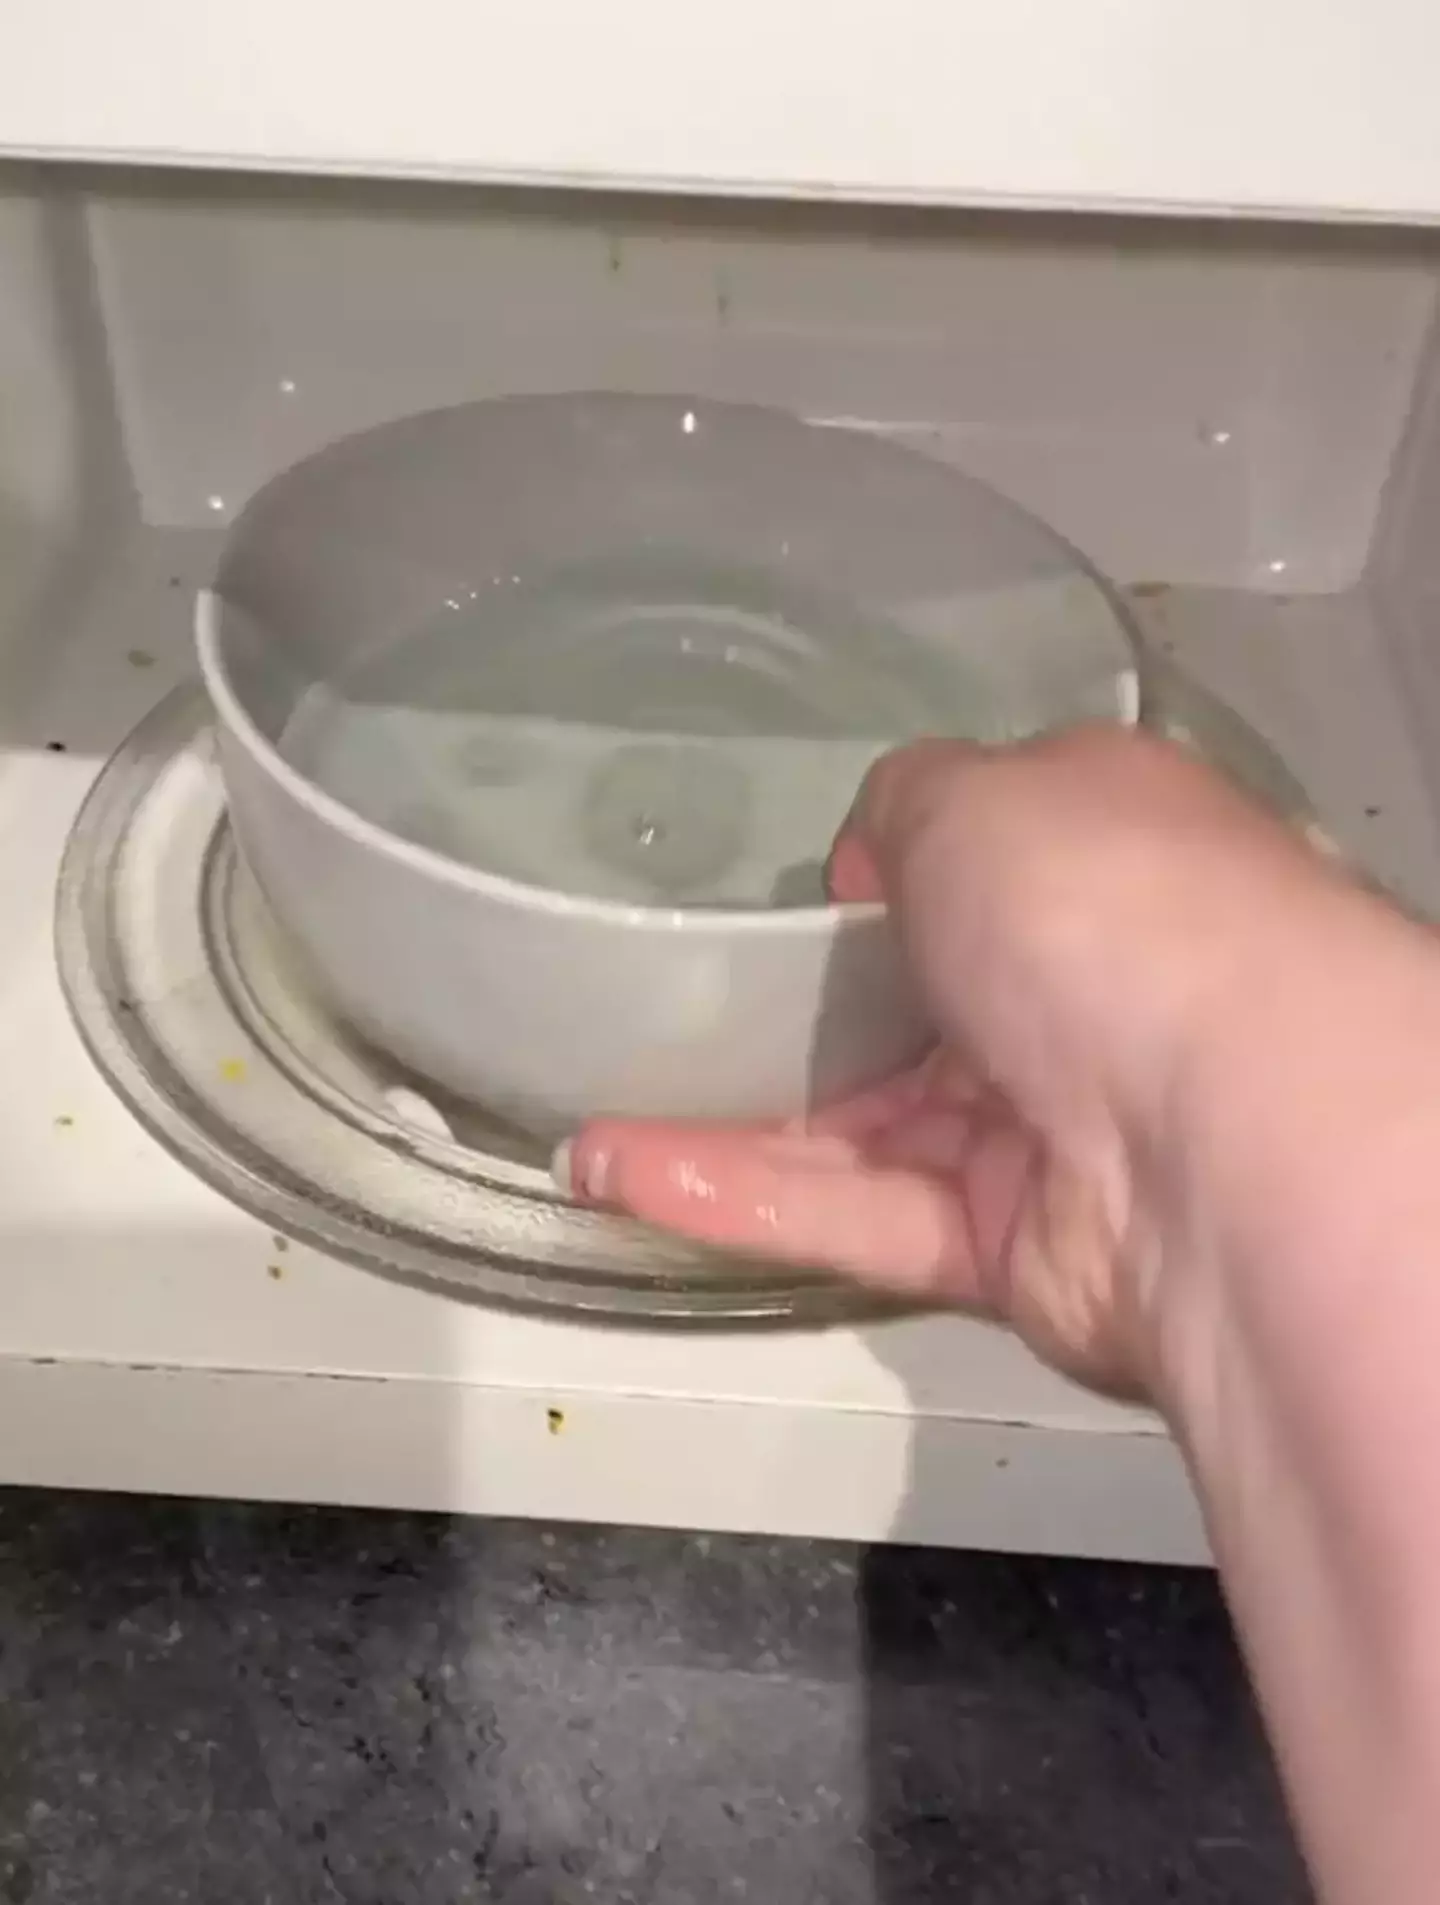 In the bowl of water goes.